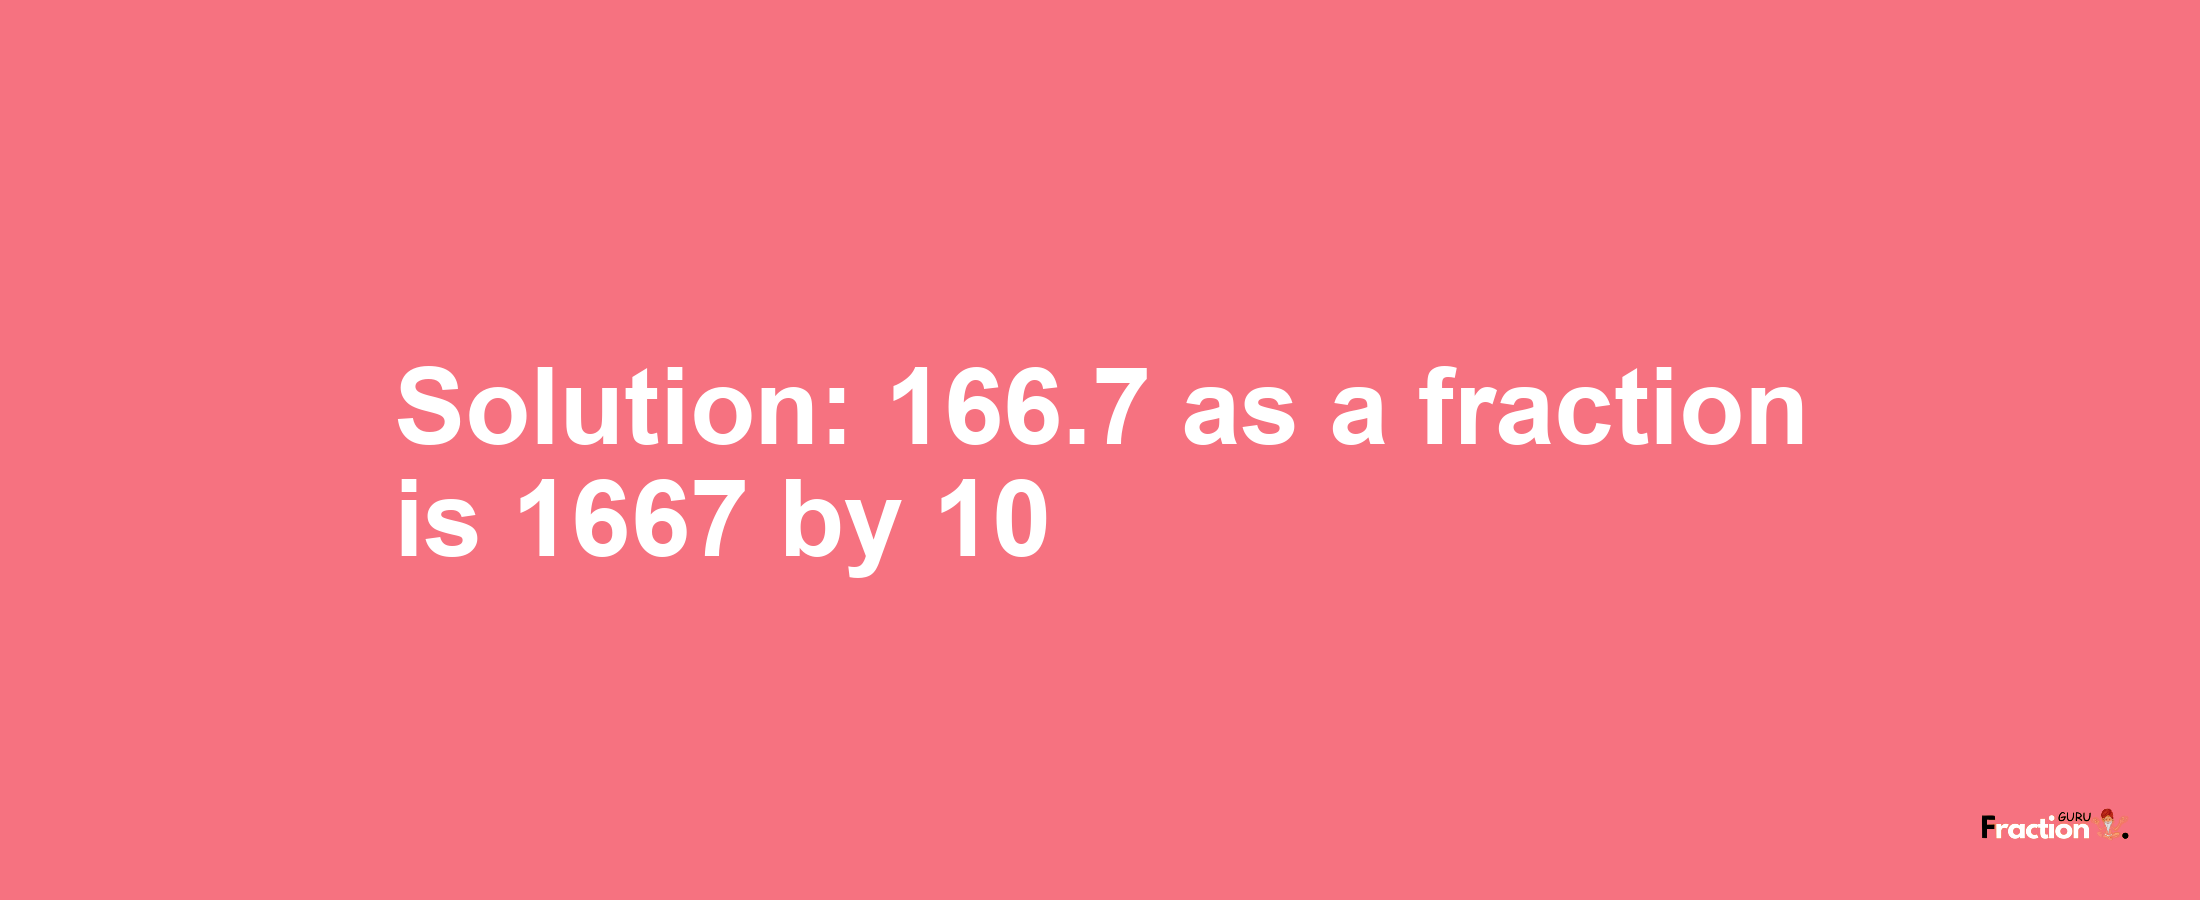 Solution:166.7 as a fraction is 1667/10